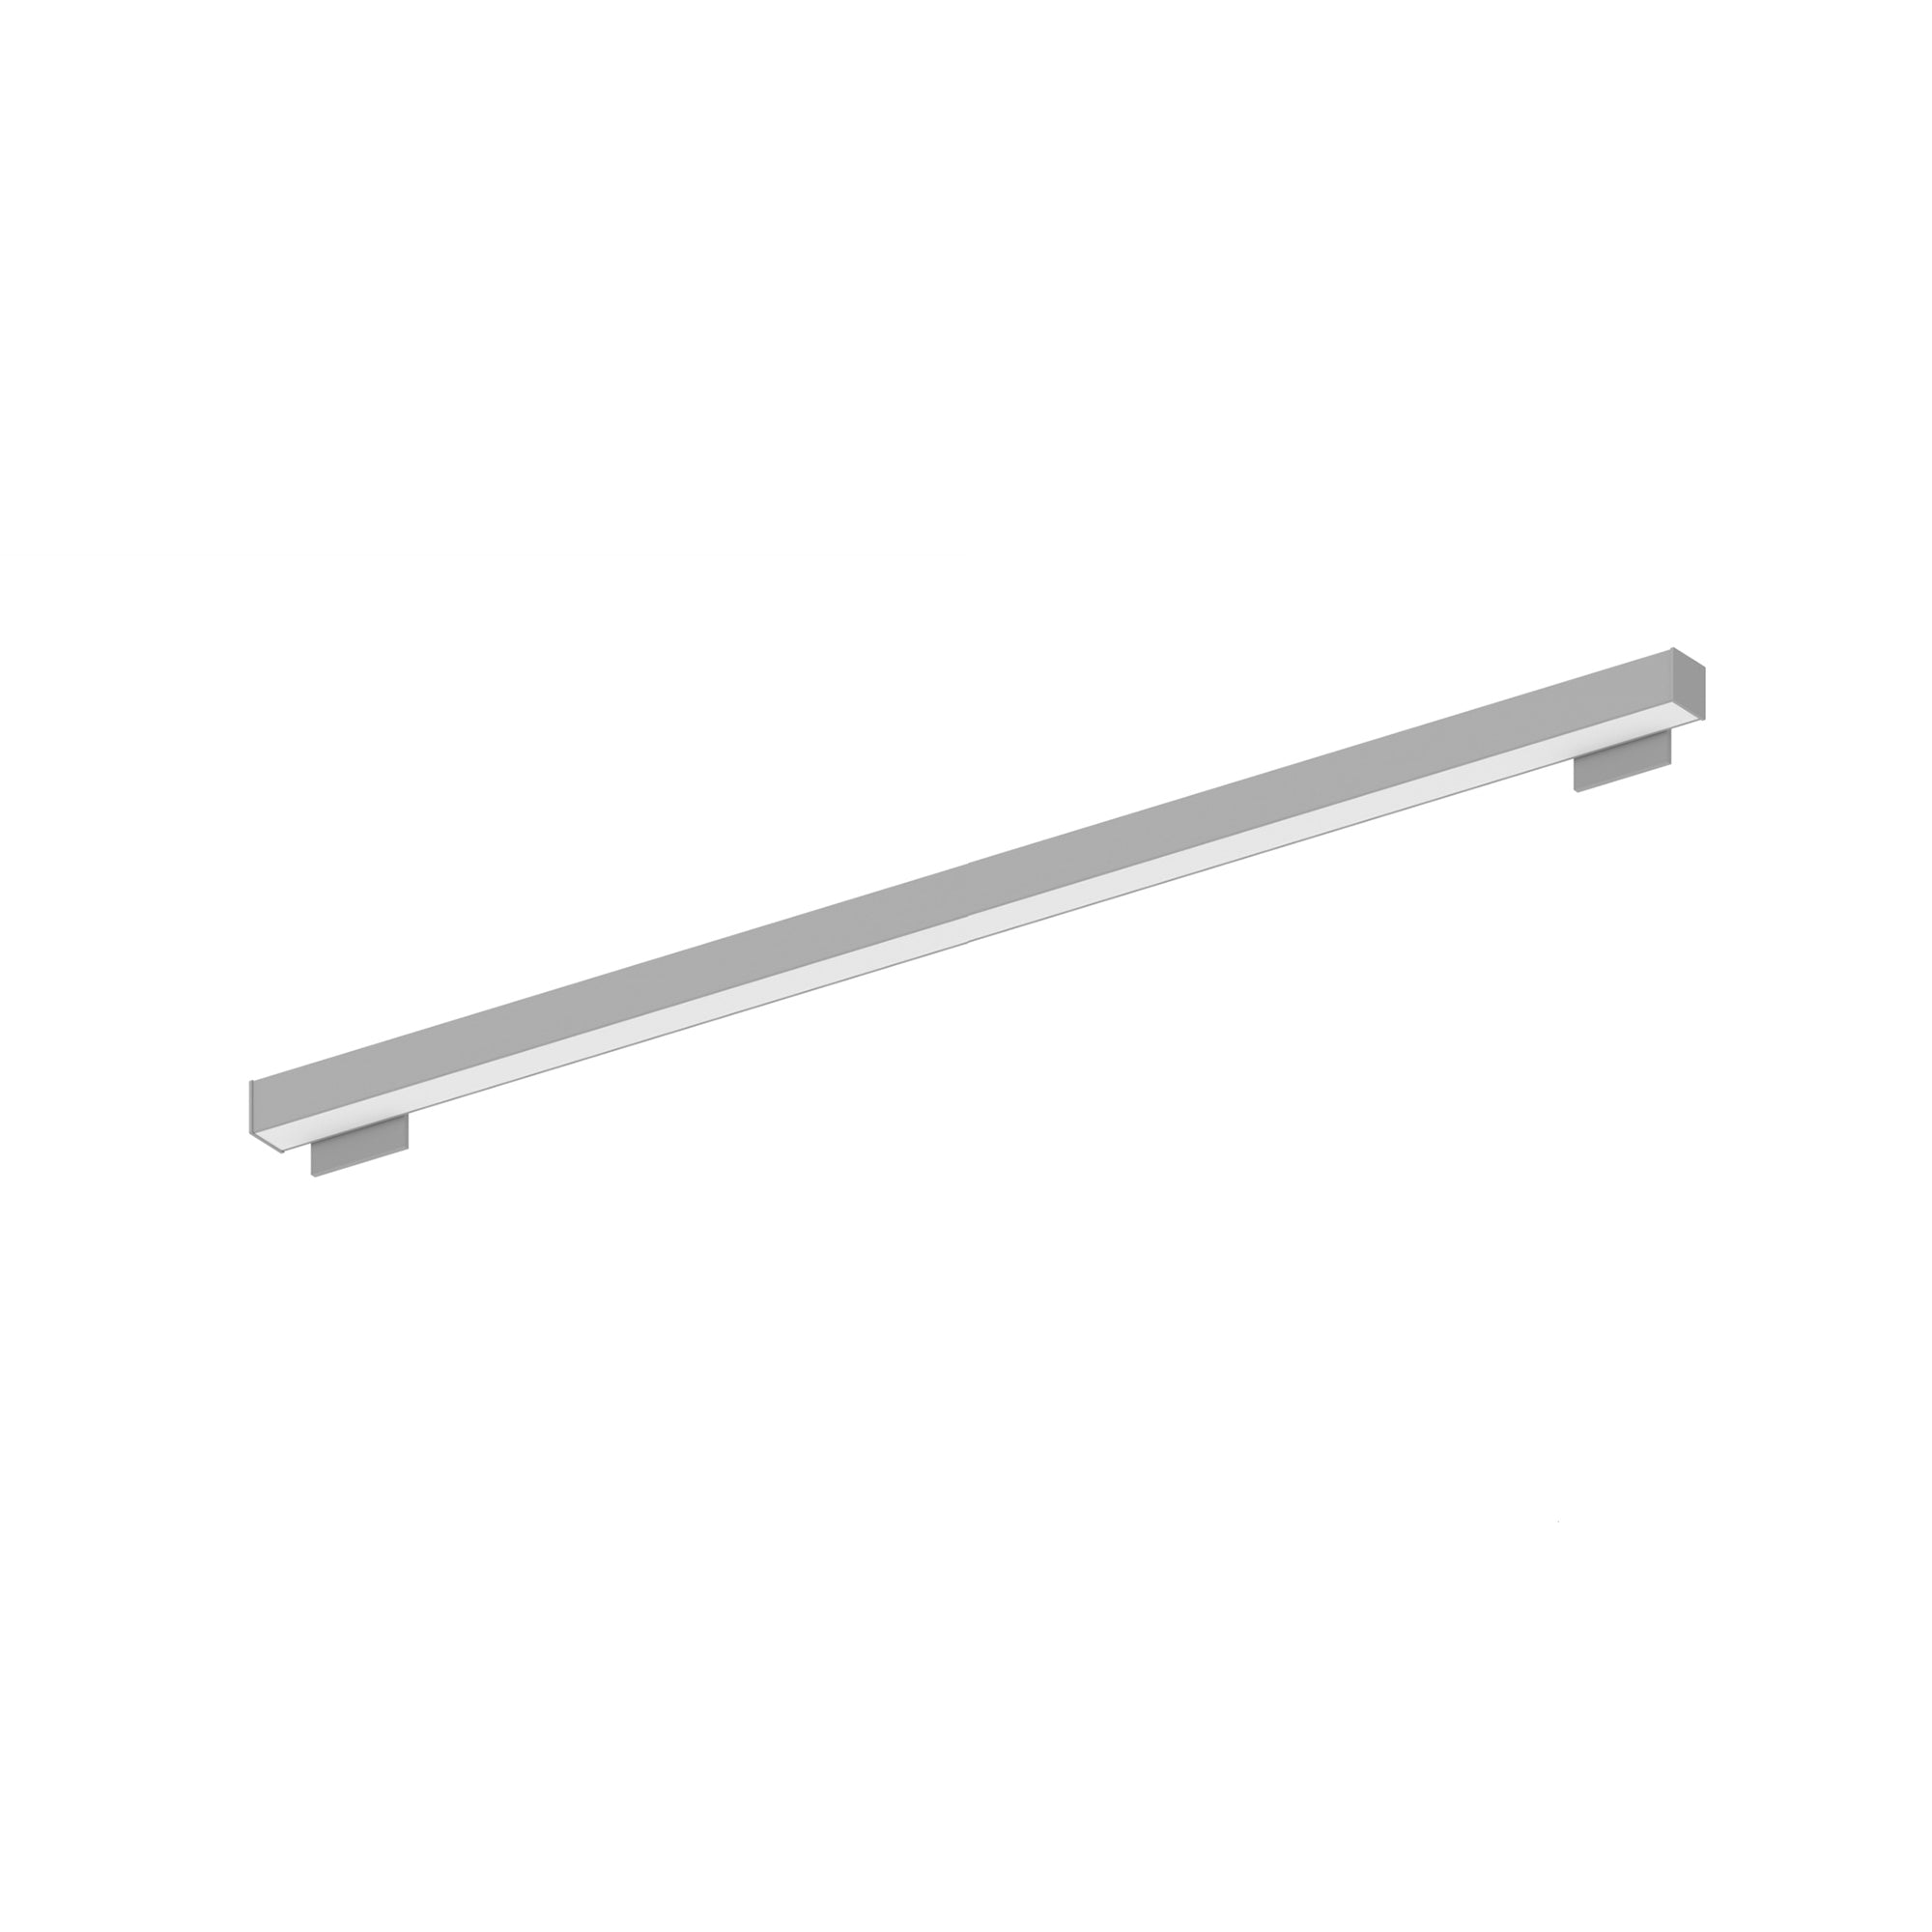 Nora Lighting NWLIN-81030A/L4-R4 - Linear - 8' L-Line LED Wall Mount Linear, 8400lm / 3000K, 4 Inchx4 Inch Left Plate & 4 Inchx4 Inch Right Plate, Aluminum Finish